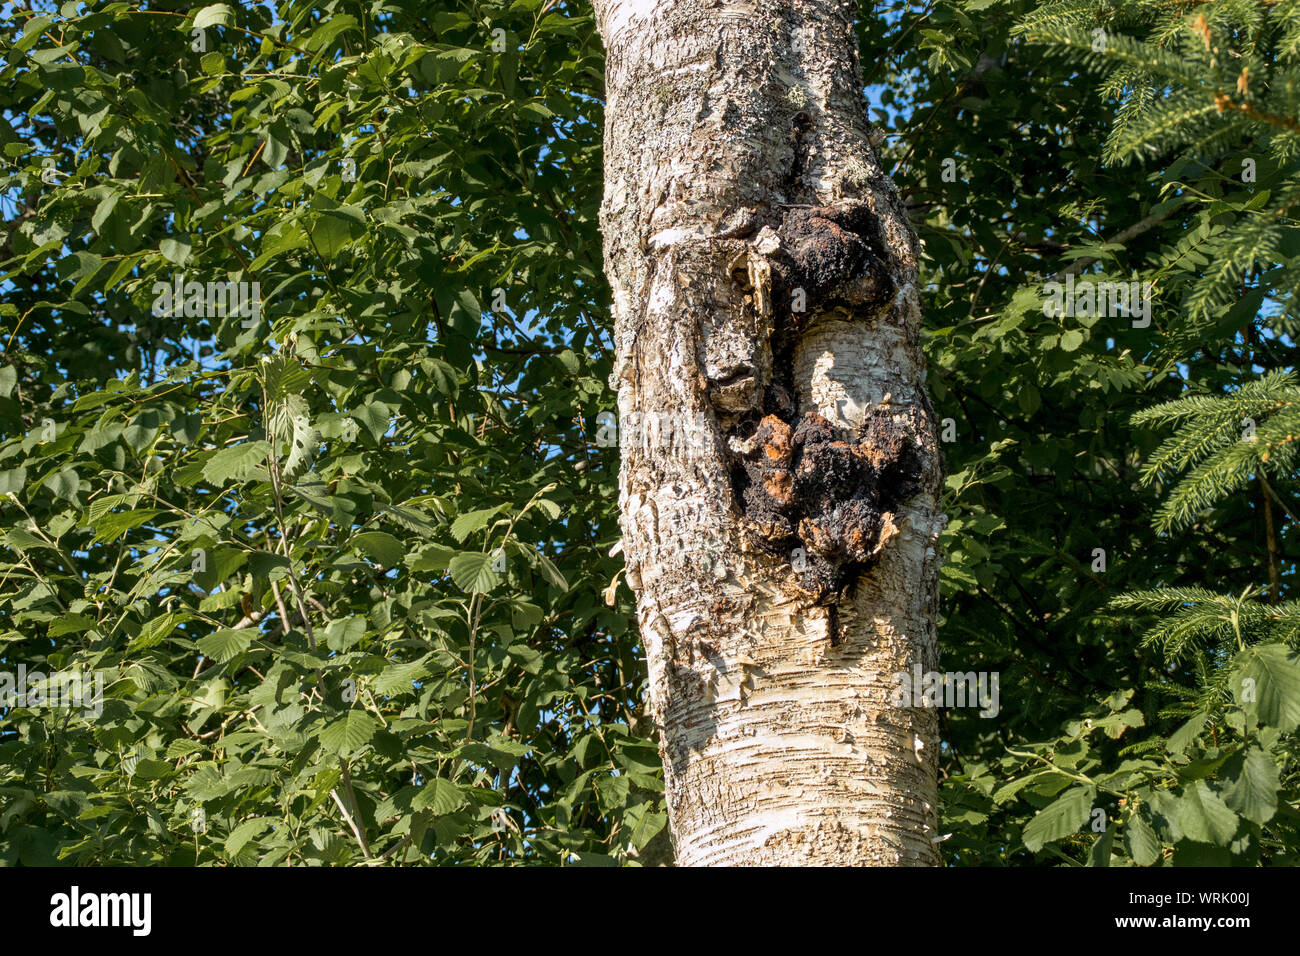 Chaga mushroom also known as Inonotus obliquus growing out of an birch tree trunk in summer. Chaga is used for natural herbal remedy. Stock Photo